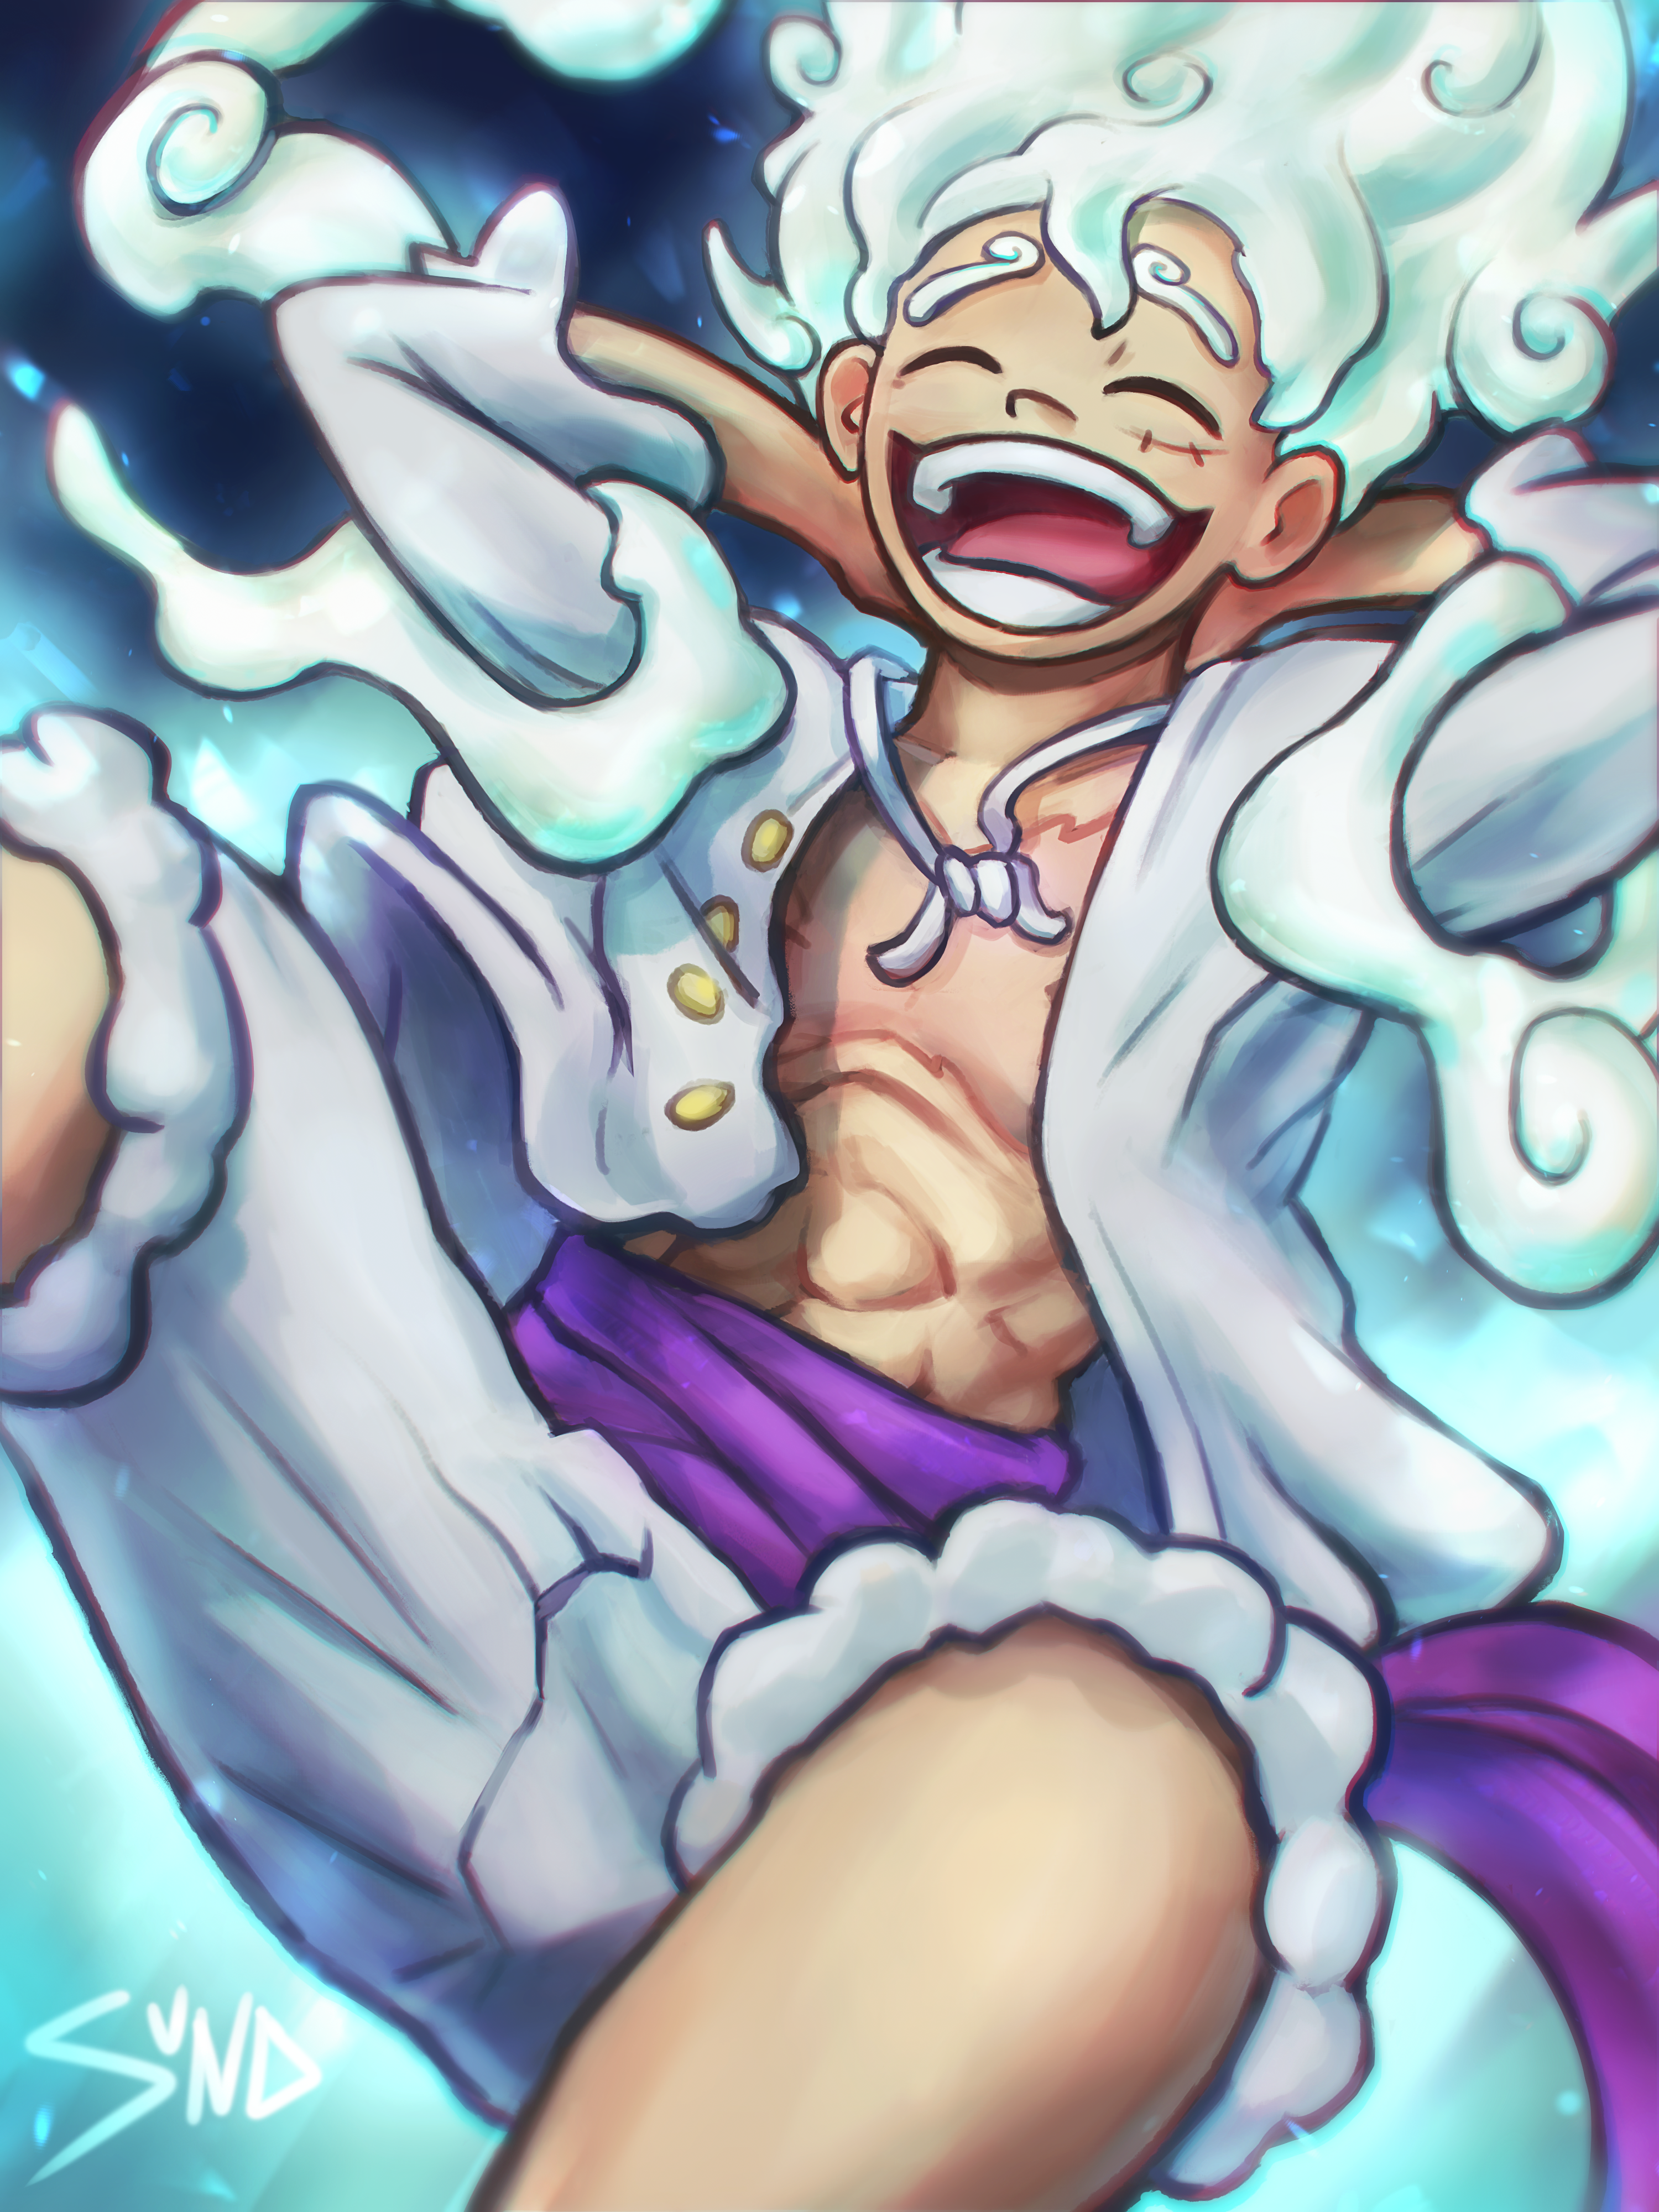 Monkey D Luffy Gear 5th One Piece Anime Boys Scars Laughing White Hair Portrait Display Open Mouth C 3000x4000